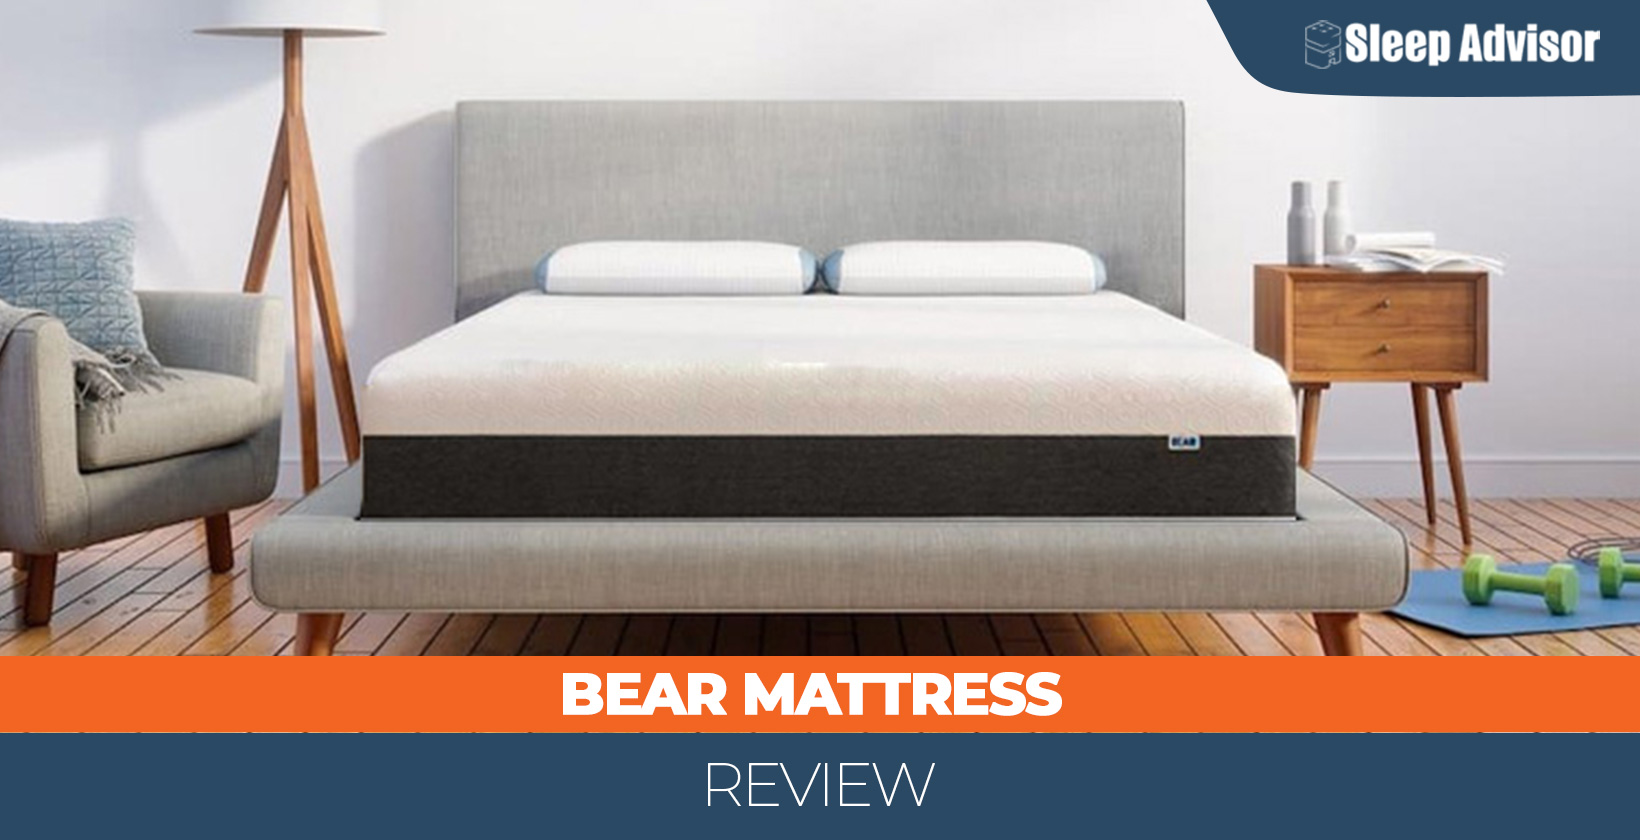 Bear Mattress Review and Prices